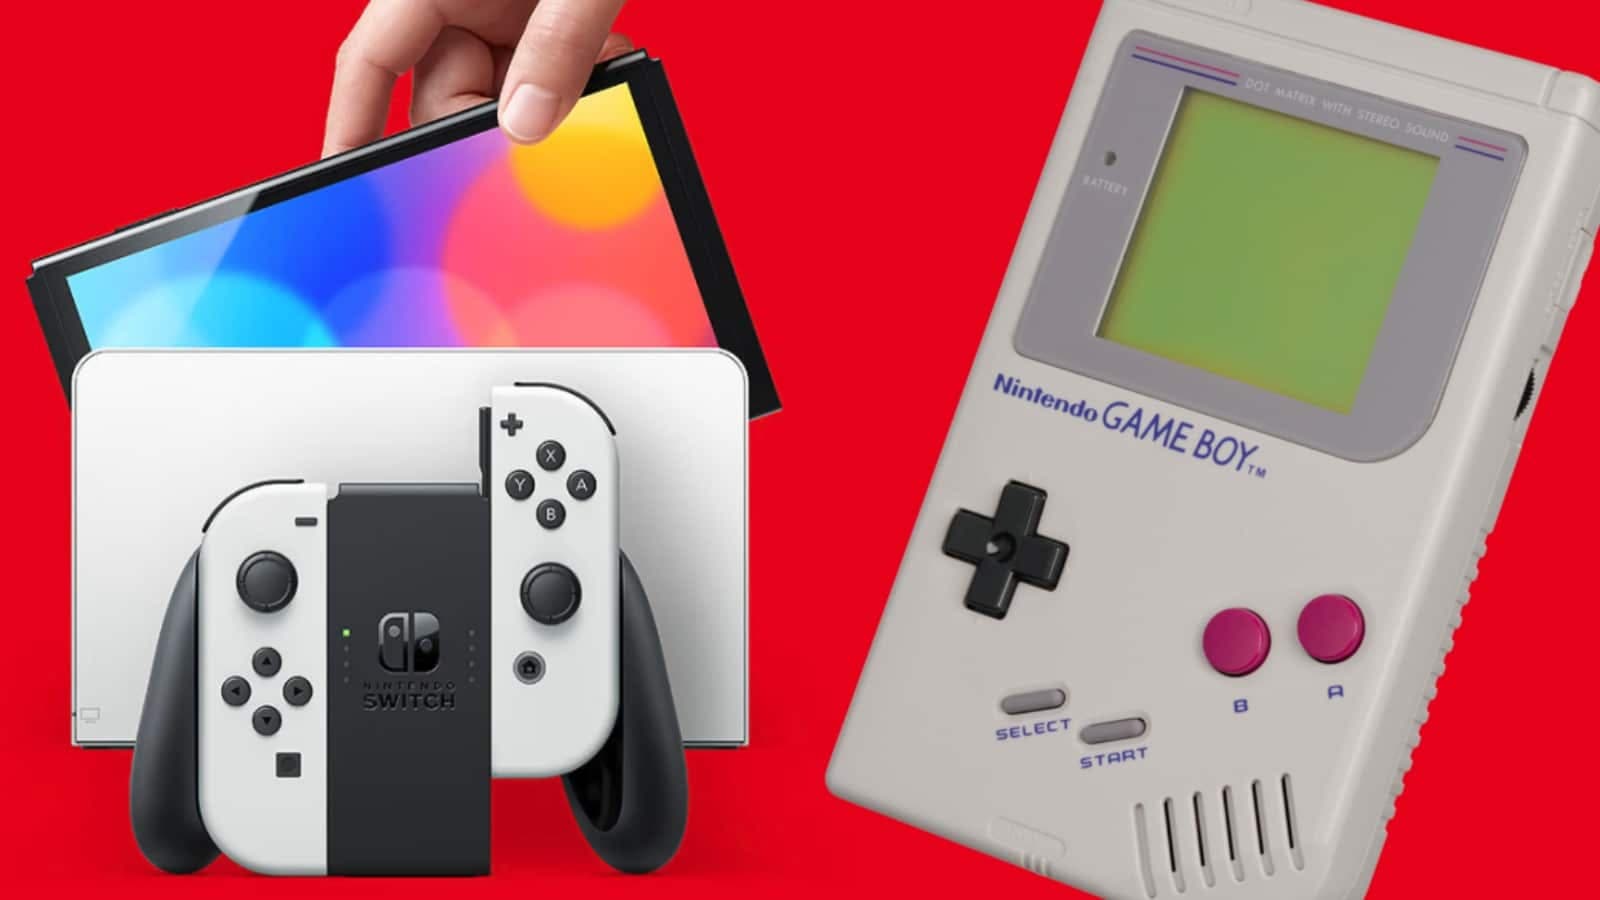 The Nintendo Switch has overtaken the Game Boy in total sales